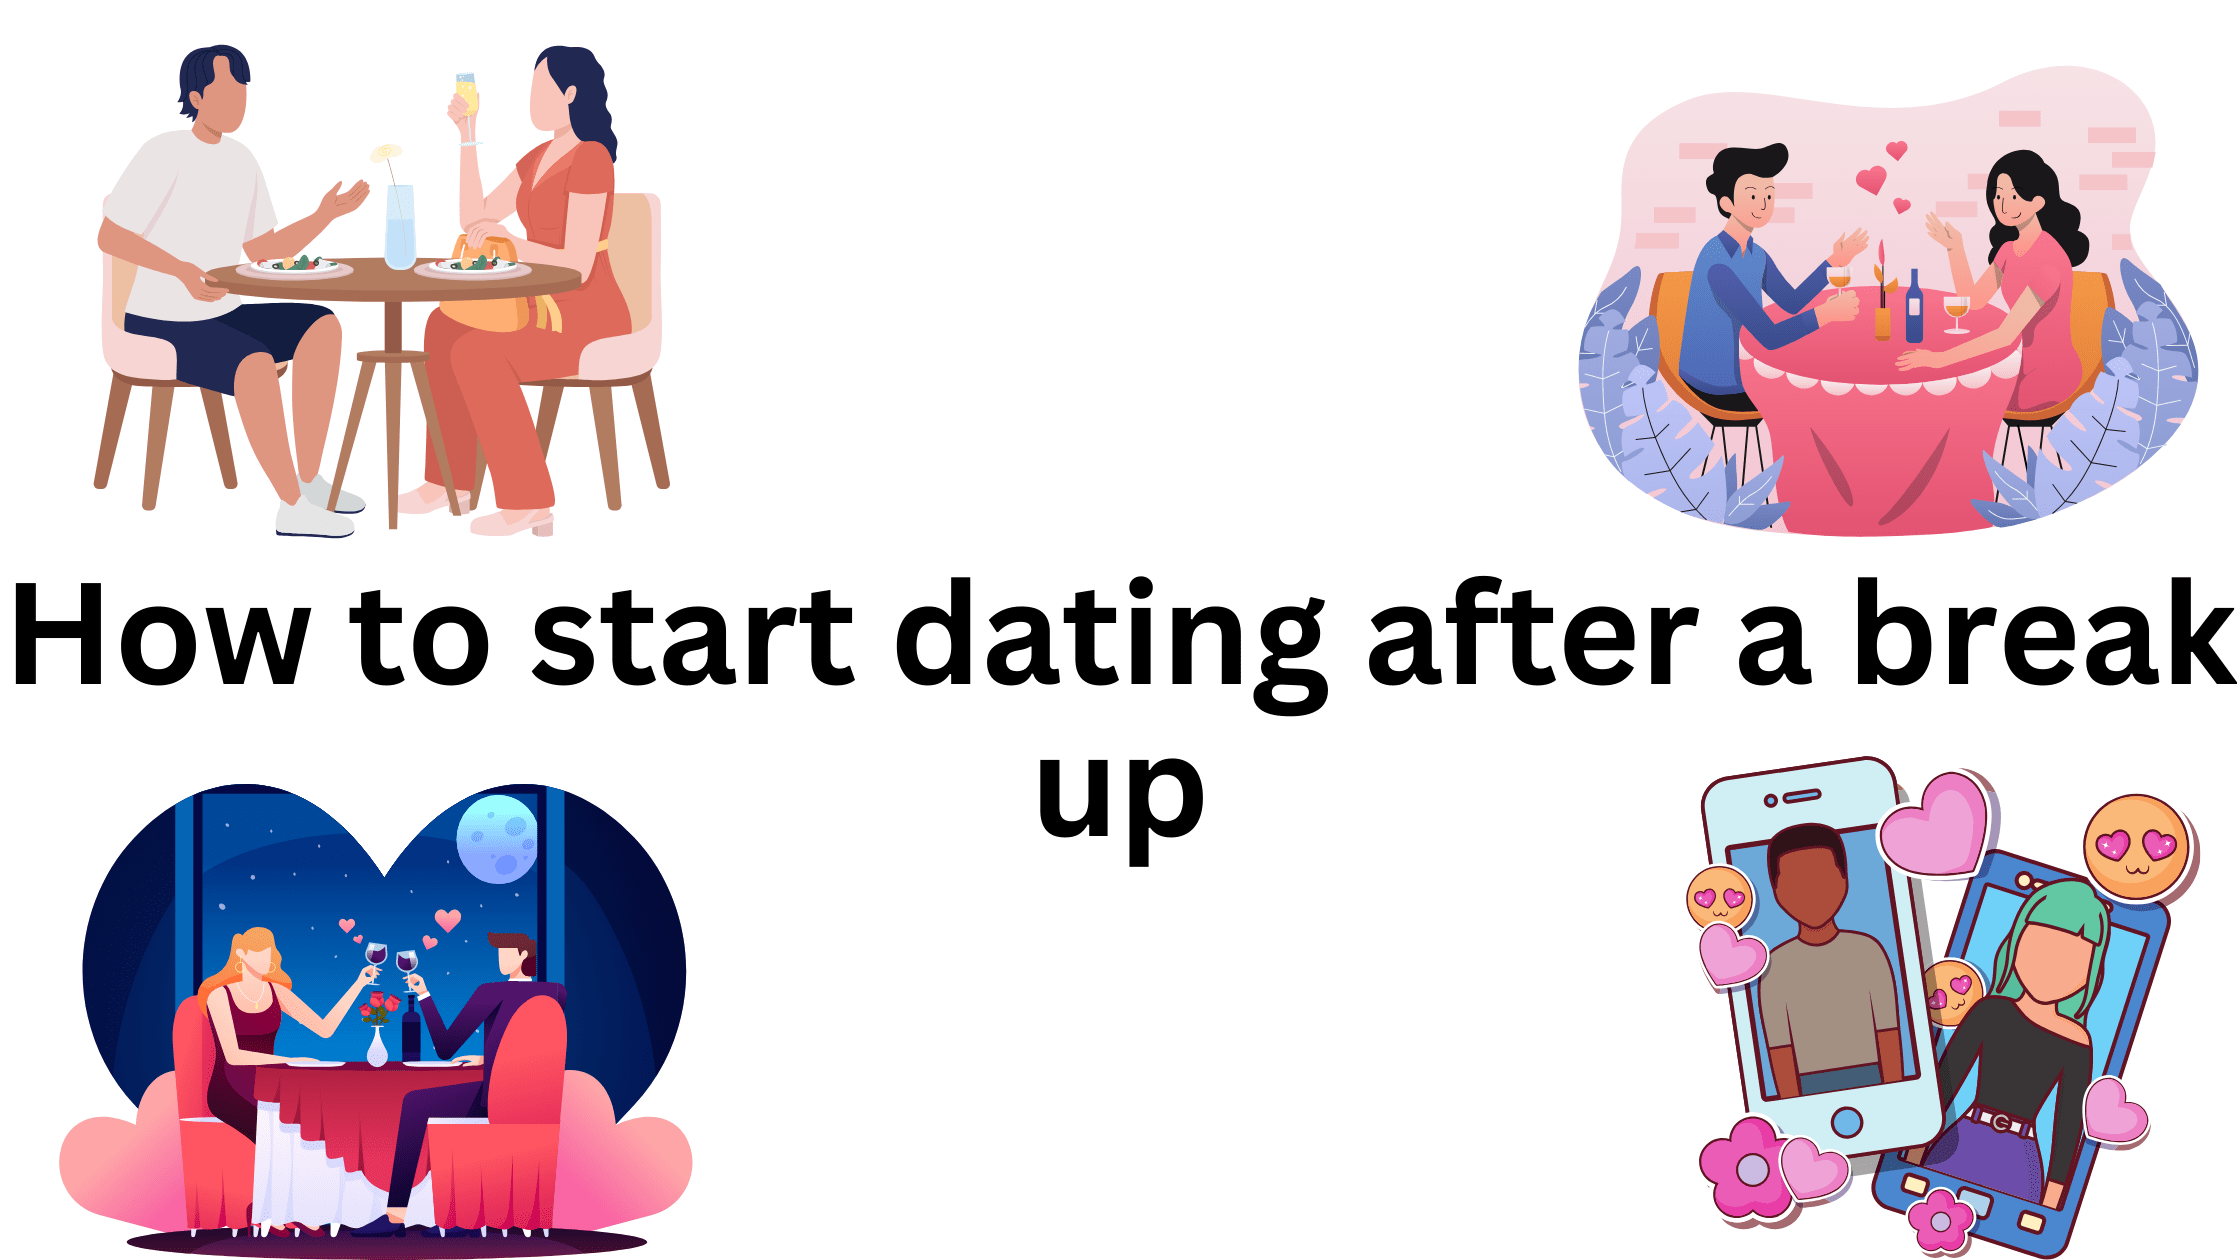 10 Great Ways to Start Dating After a Break Up 36